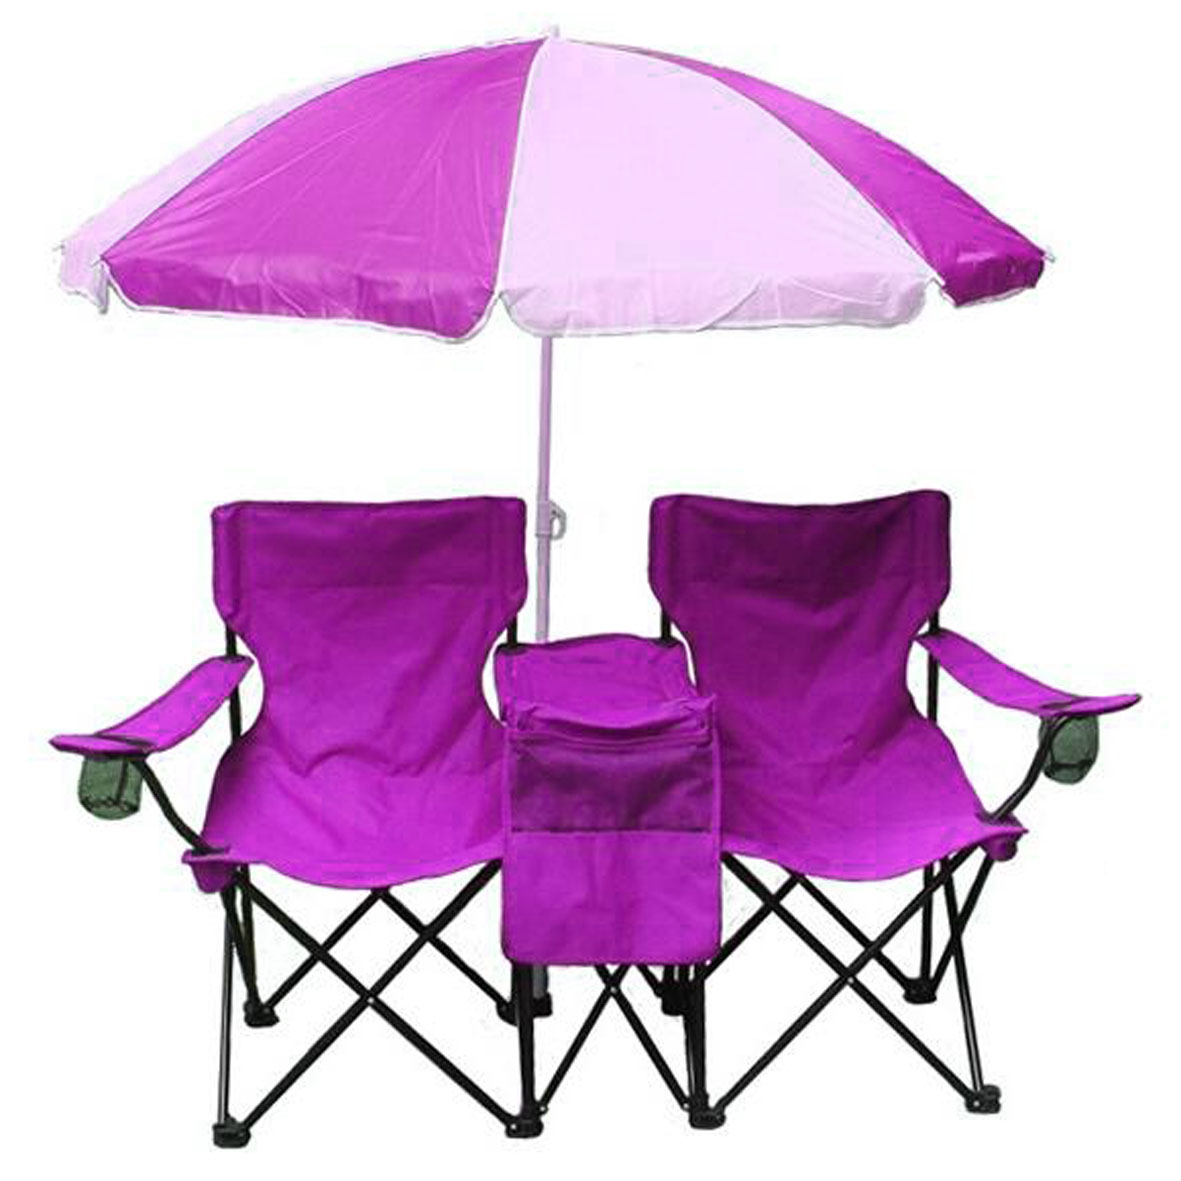 GL-AAA1360 Double Chairs with Umbrella